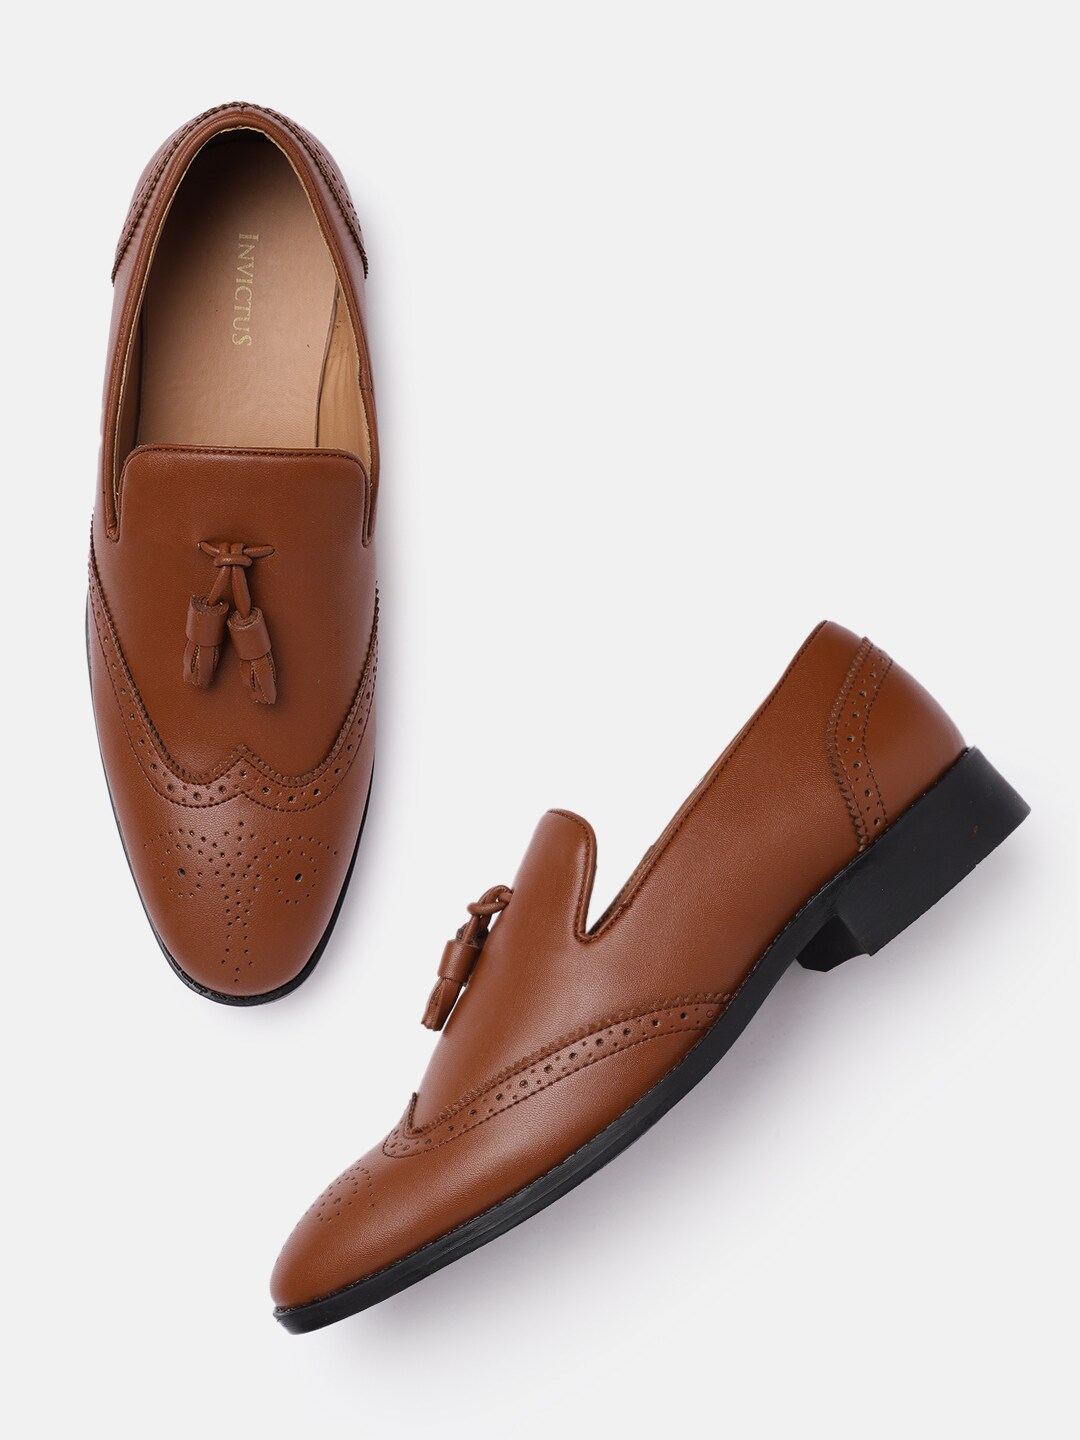 INVICTUS Men Tan Formal Slip-On Brogues Starts from Rs. 499